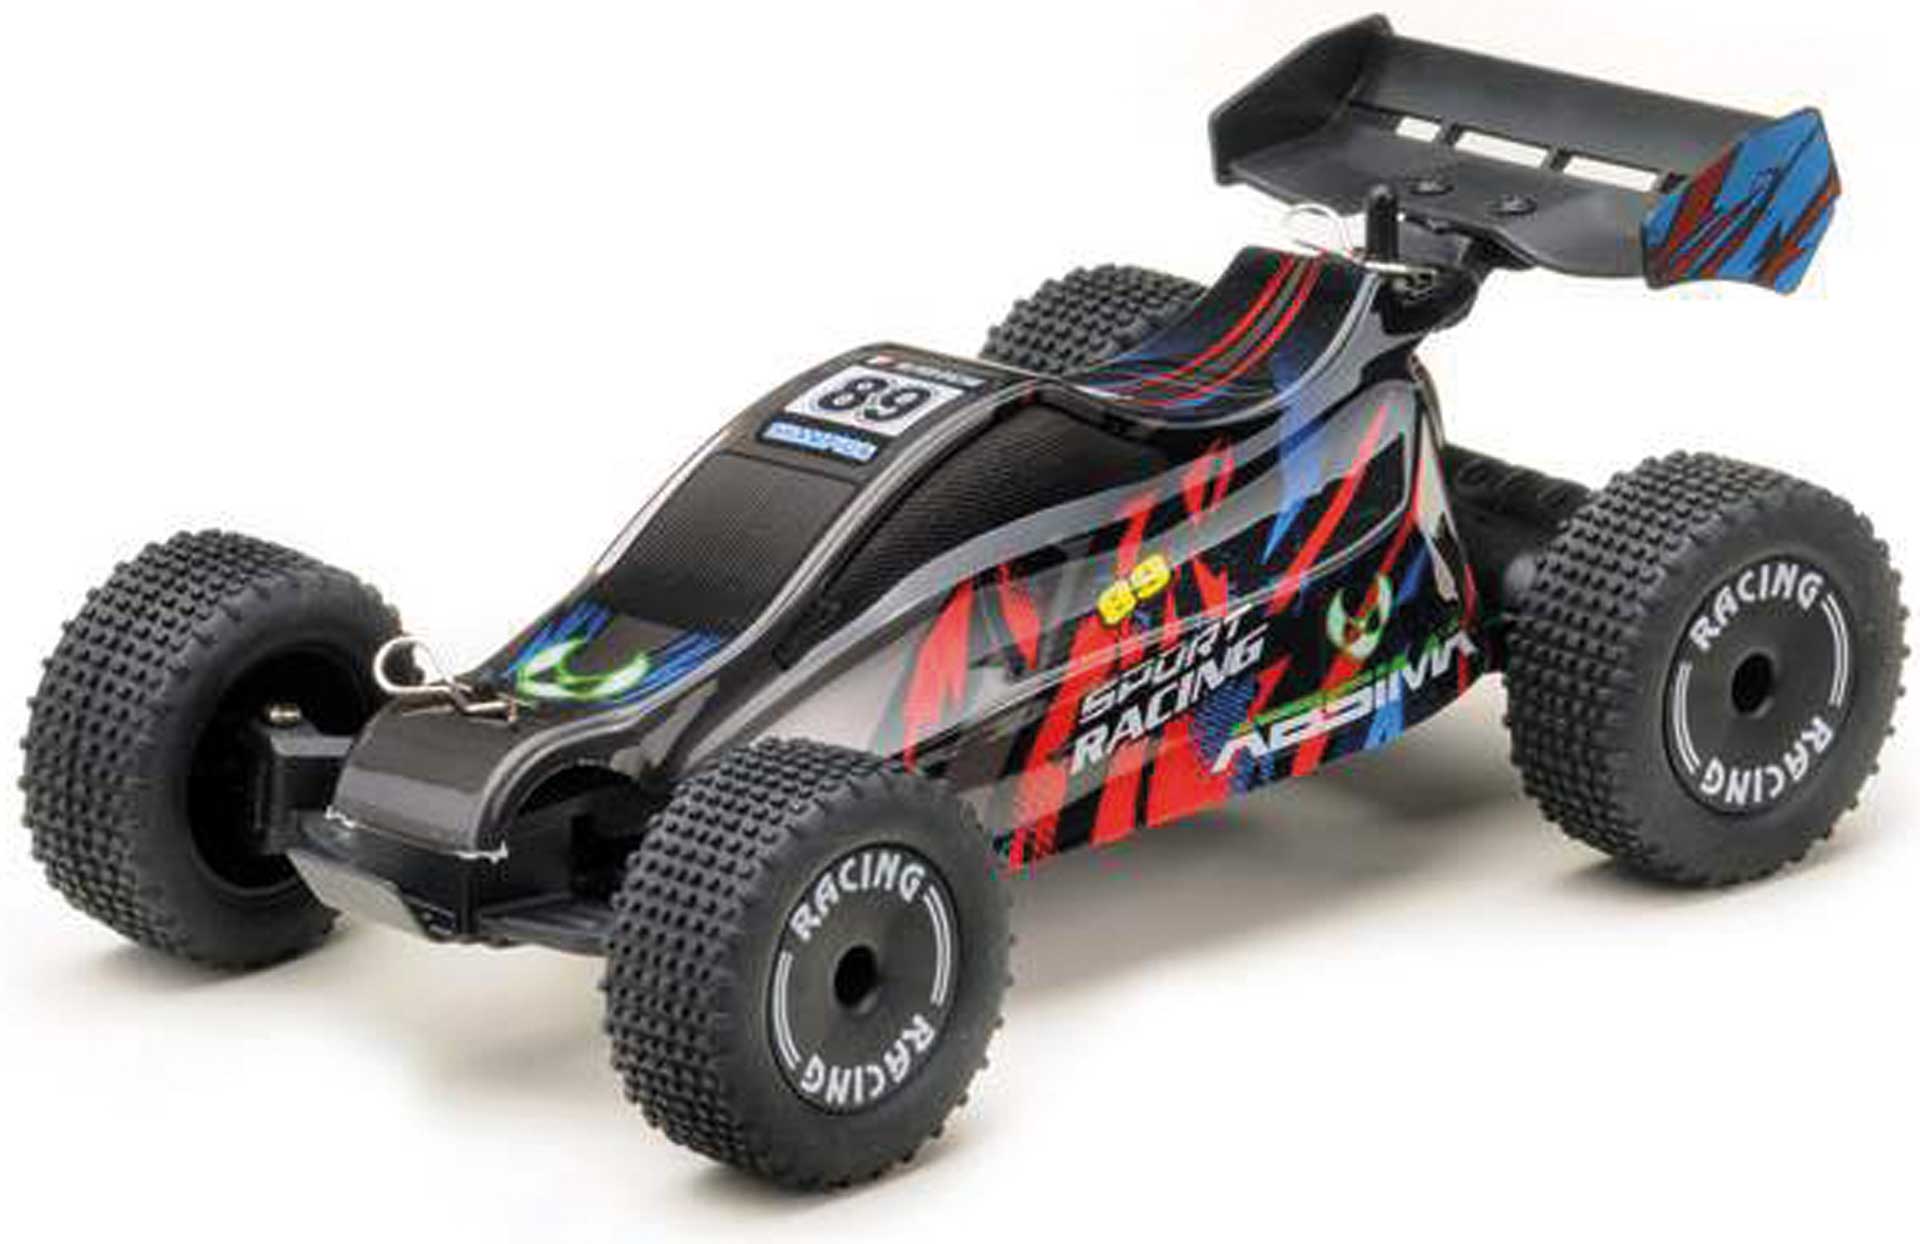 ABSIMA 1:24 EP 2WD Racing Buggy "X Racer" RTR mit ESP